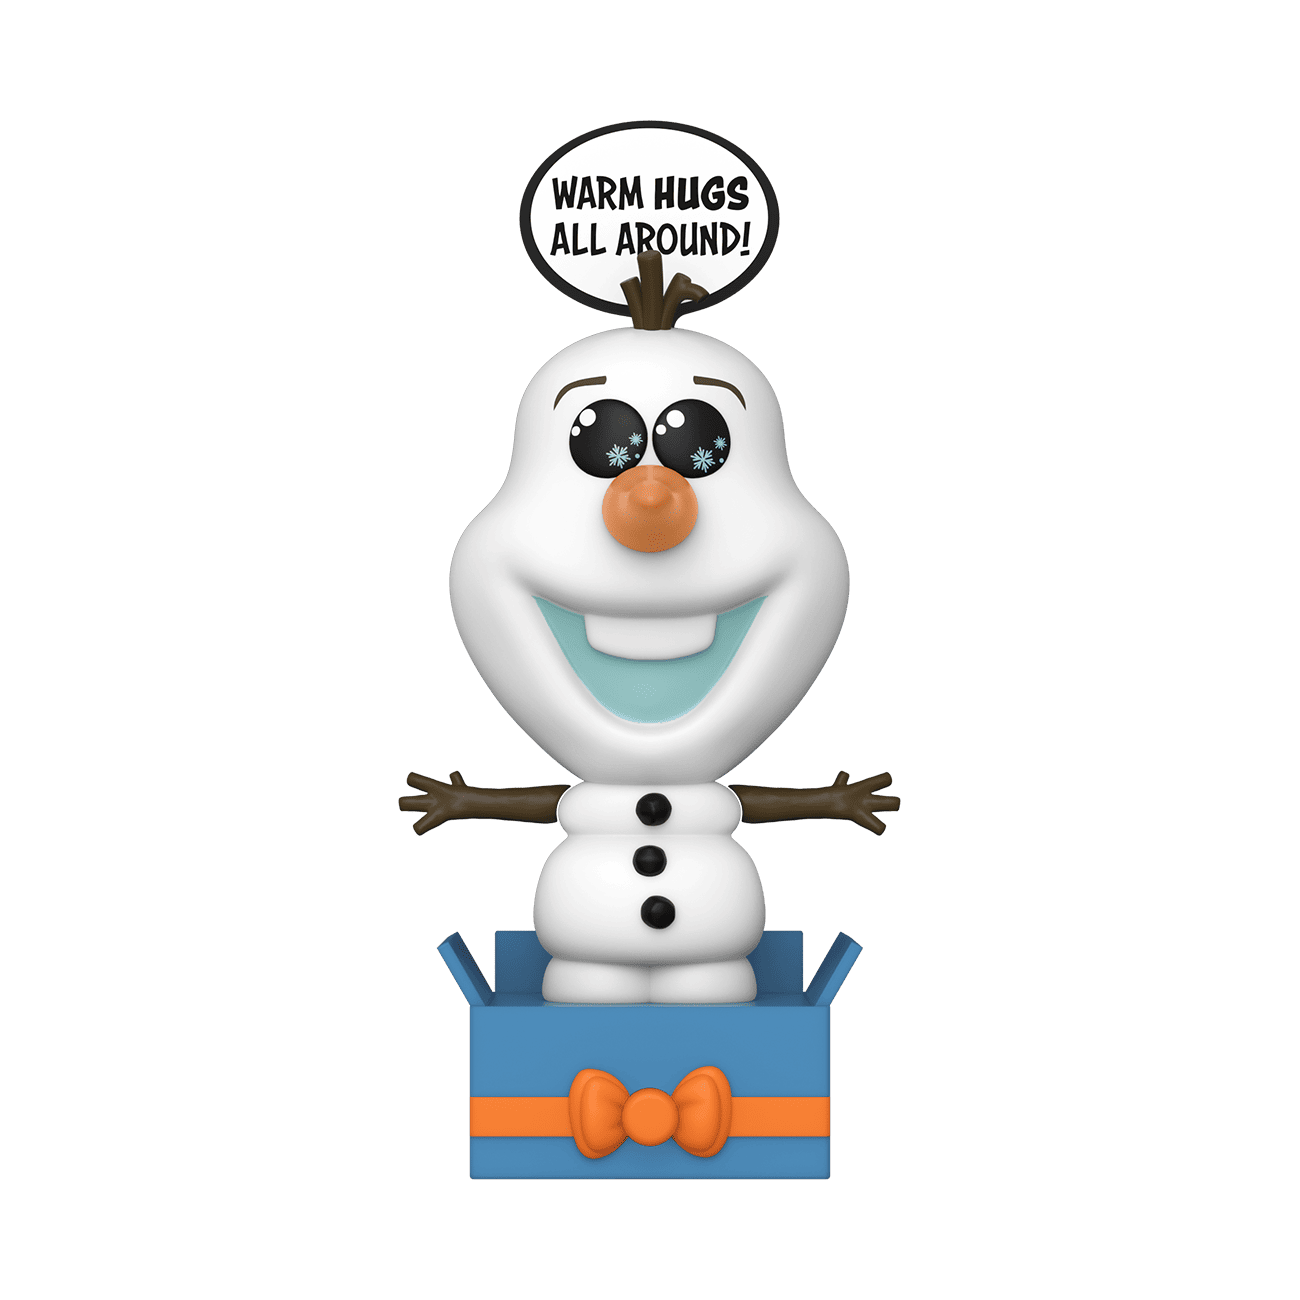 New Olaf Presents Funko Pops Now Available for Preorder 